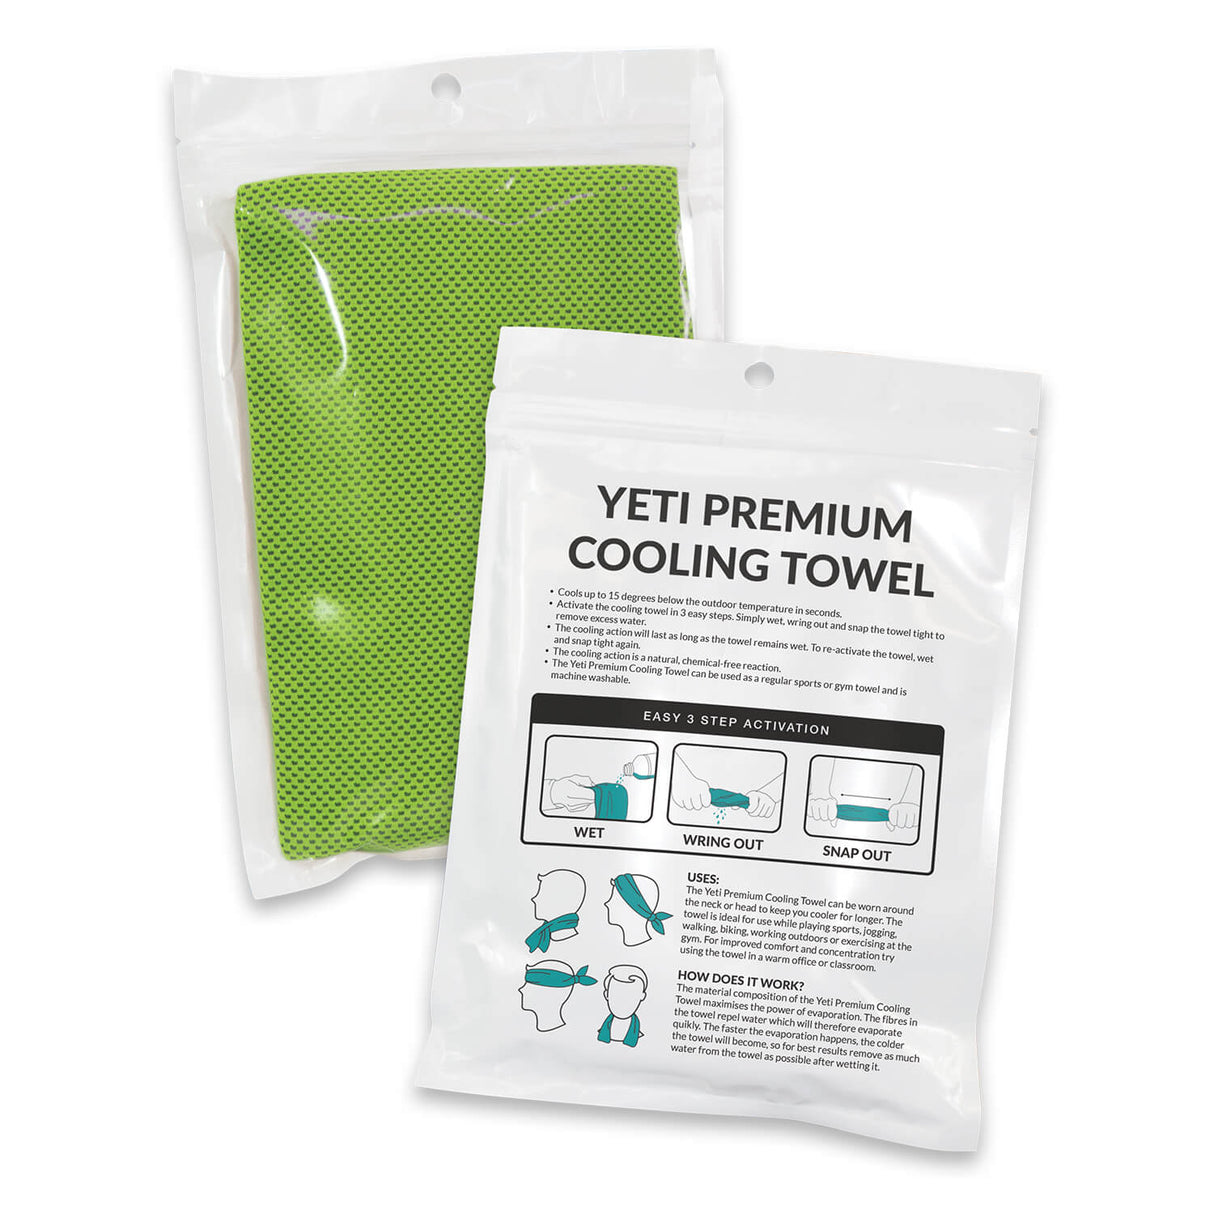 Yeti Premium Cooling Towel - Pouch - Printed